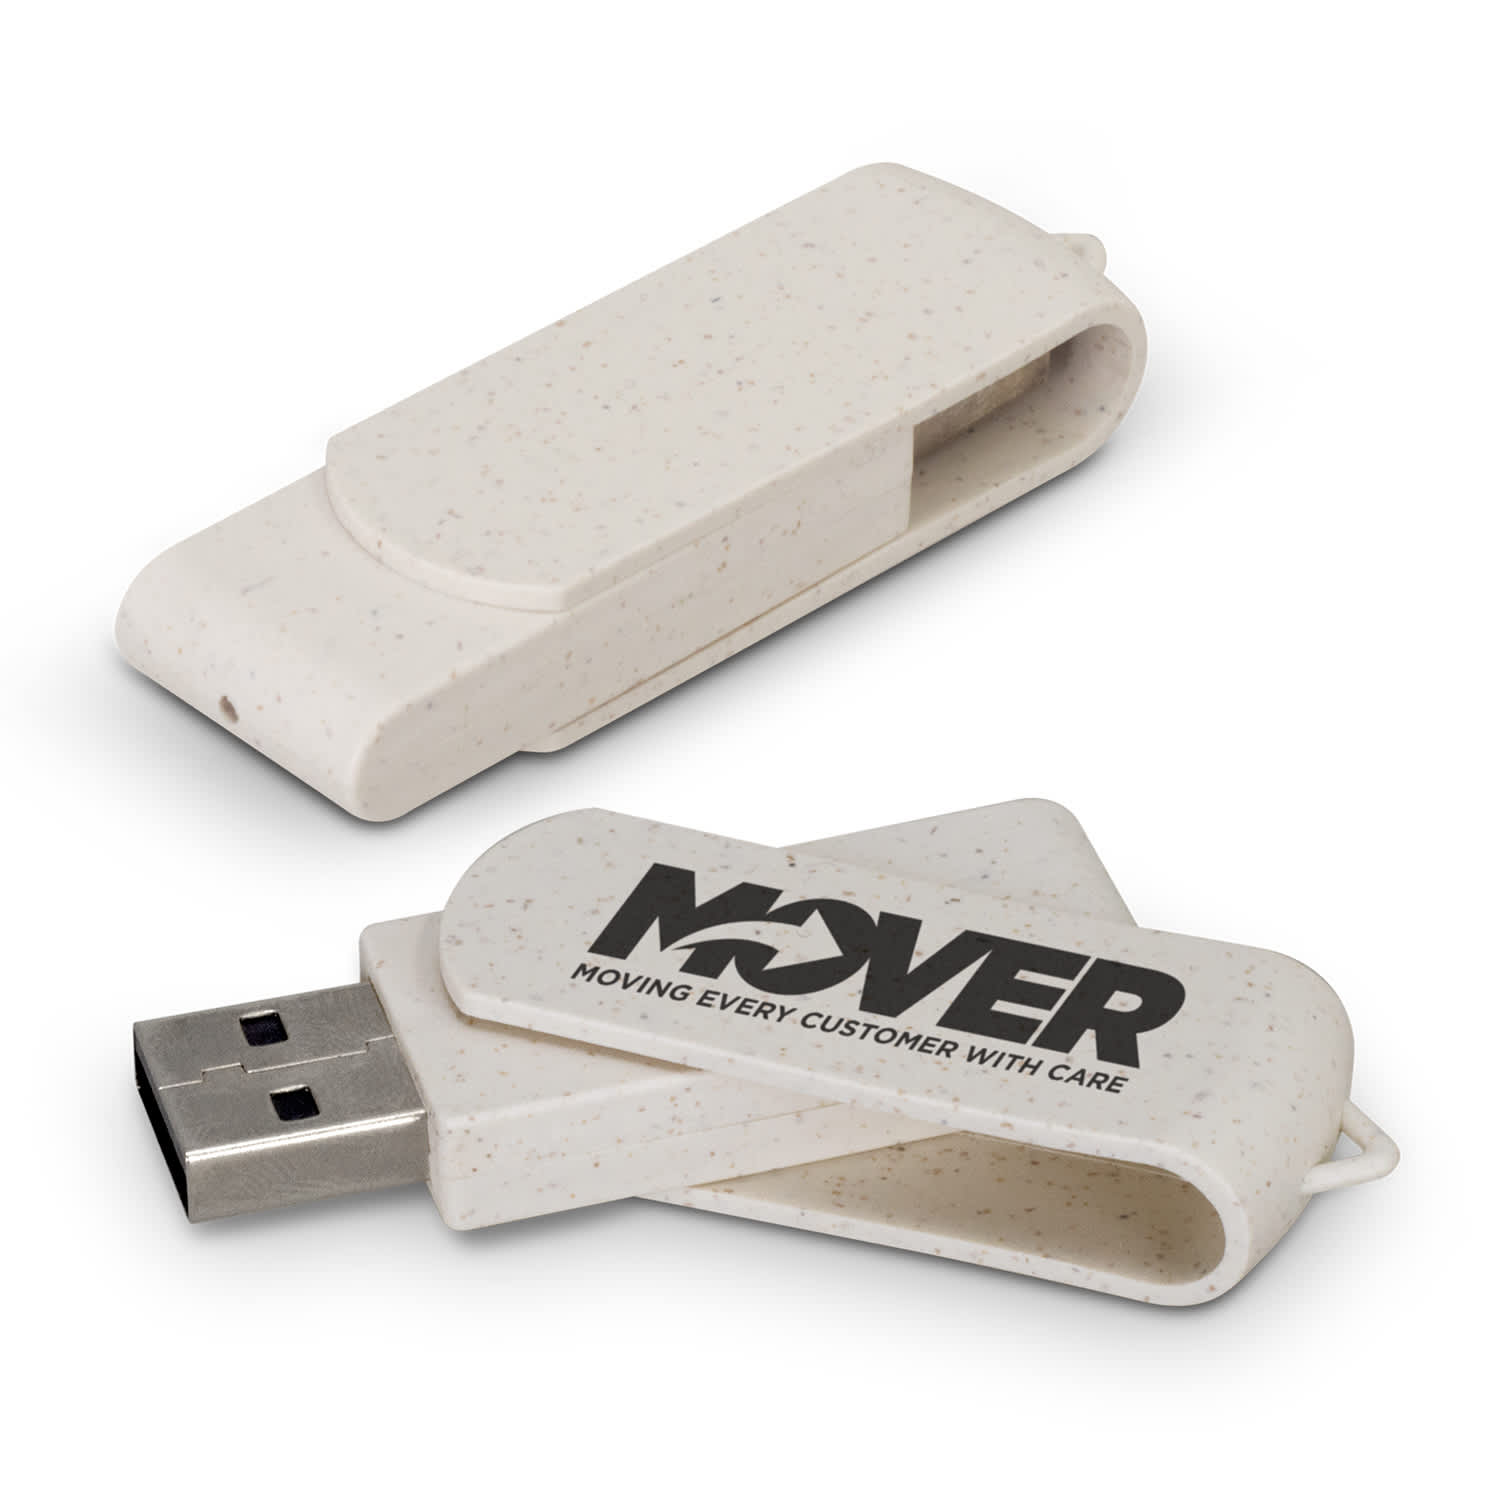 Choice 8GB Flash Drive | Company Branded USB Drives | Personalised USB Drives | Custom USB Drives Non Minimum | Custom USB Design | Custom Merchandise | Merchandise | Customised Gifts NZ | Corporate Gifts | Promotional Products NZ | Branded merchandise NZ